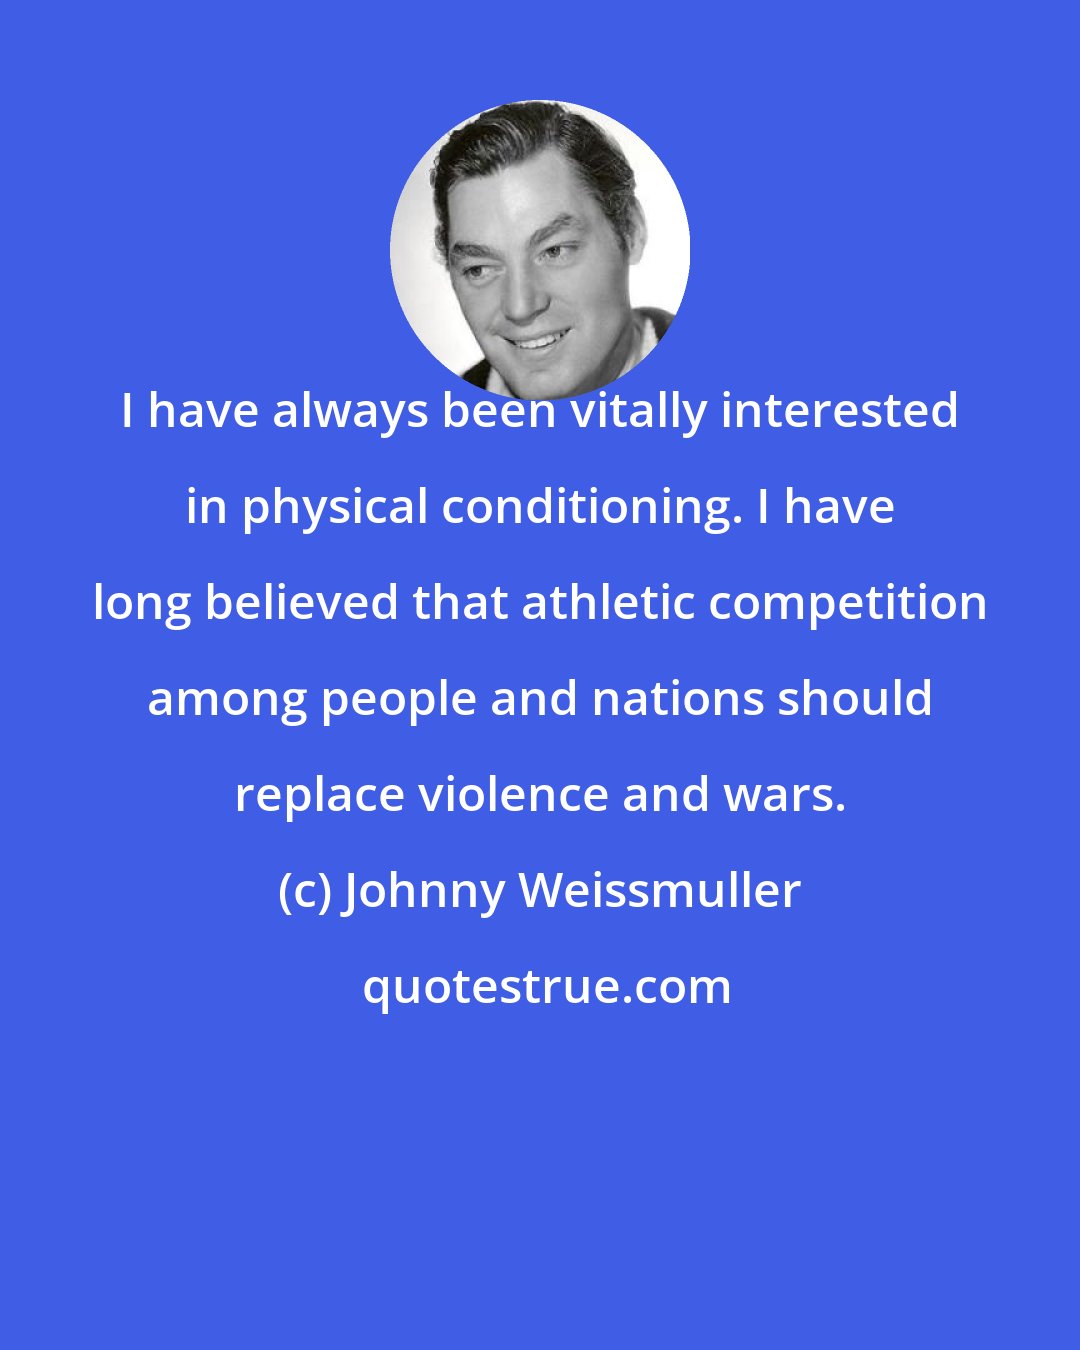 Johnny Weissmuller: I have always been vitally interested in physical conditioning. I have long believed that athletic competition among people and nations should replace violence and wars.